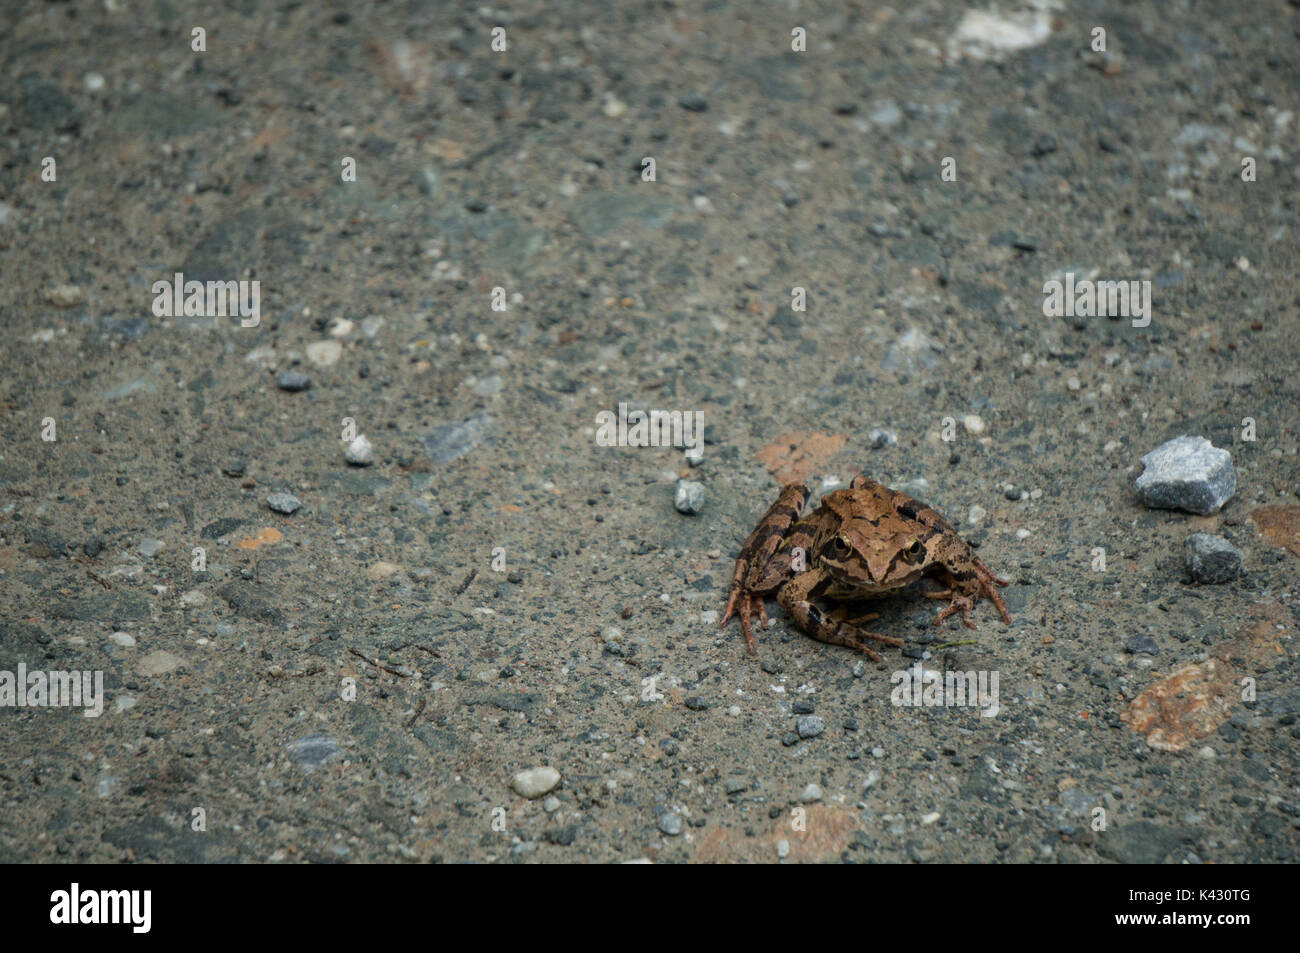 Brown frog on a dirt road Stock Photo